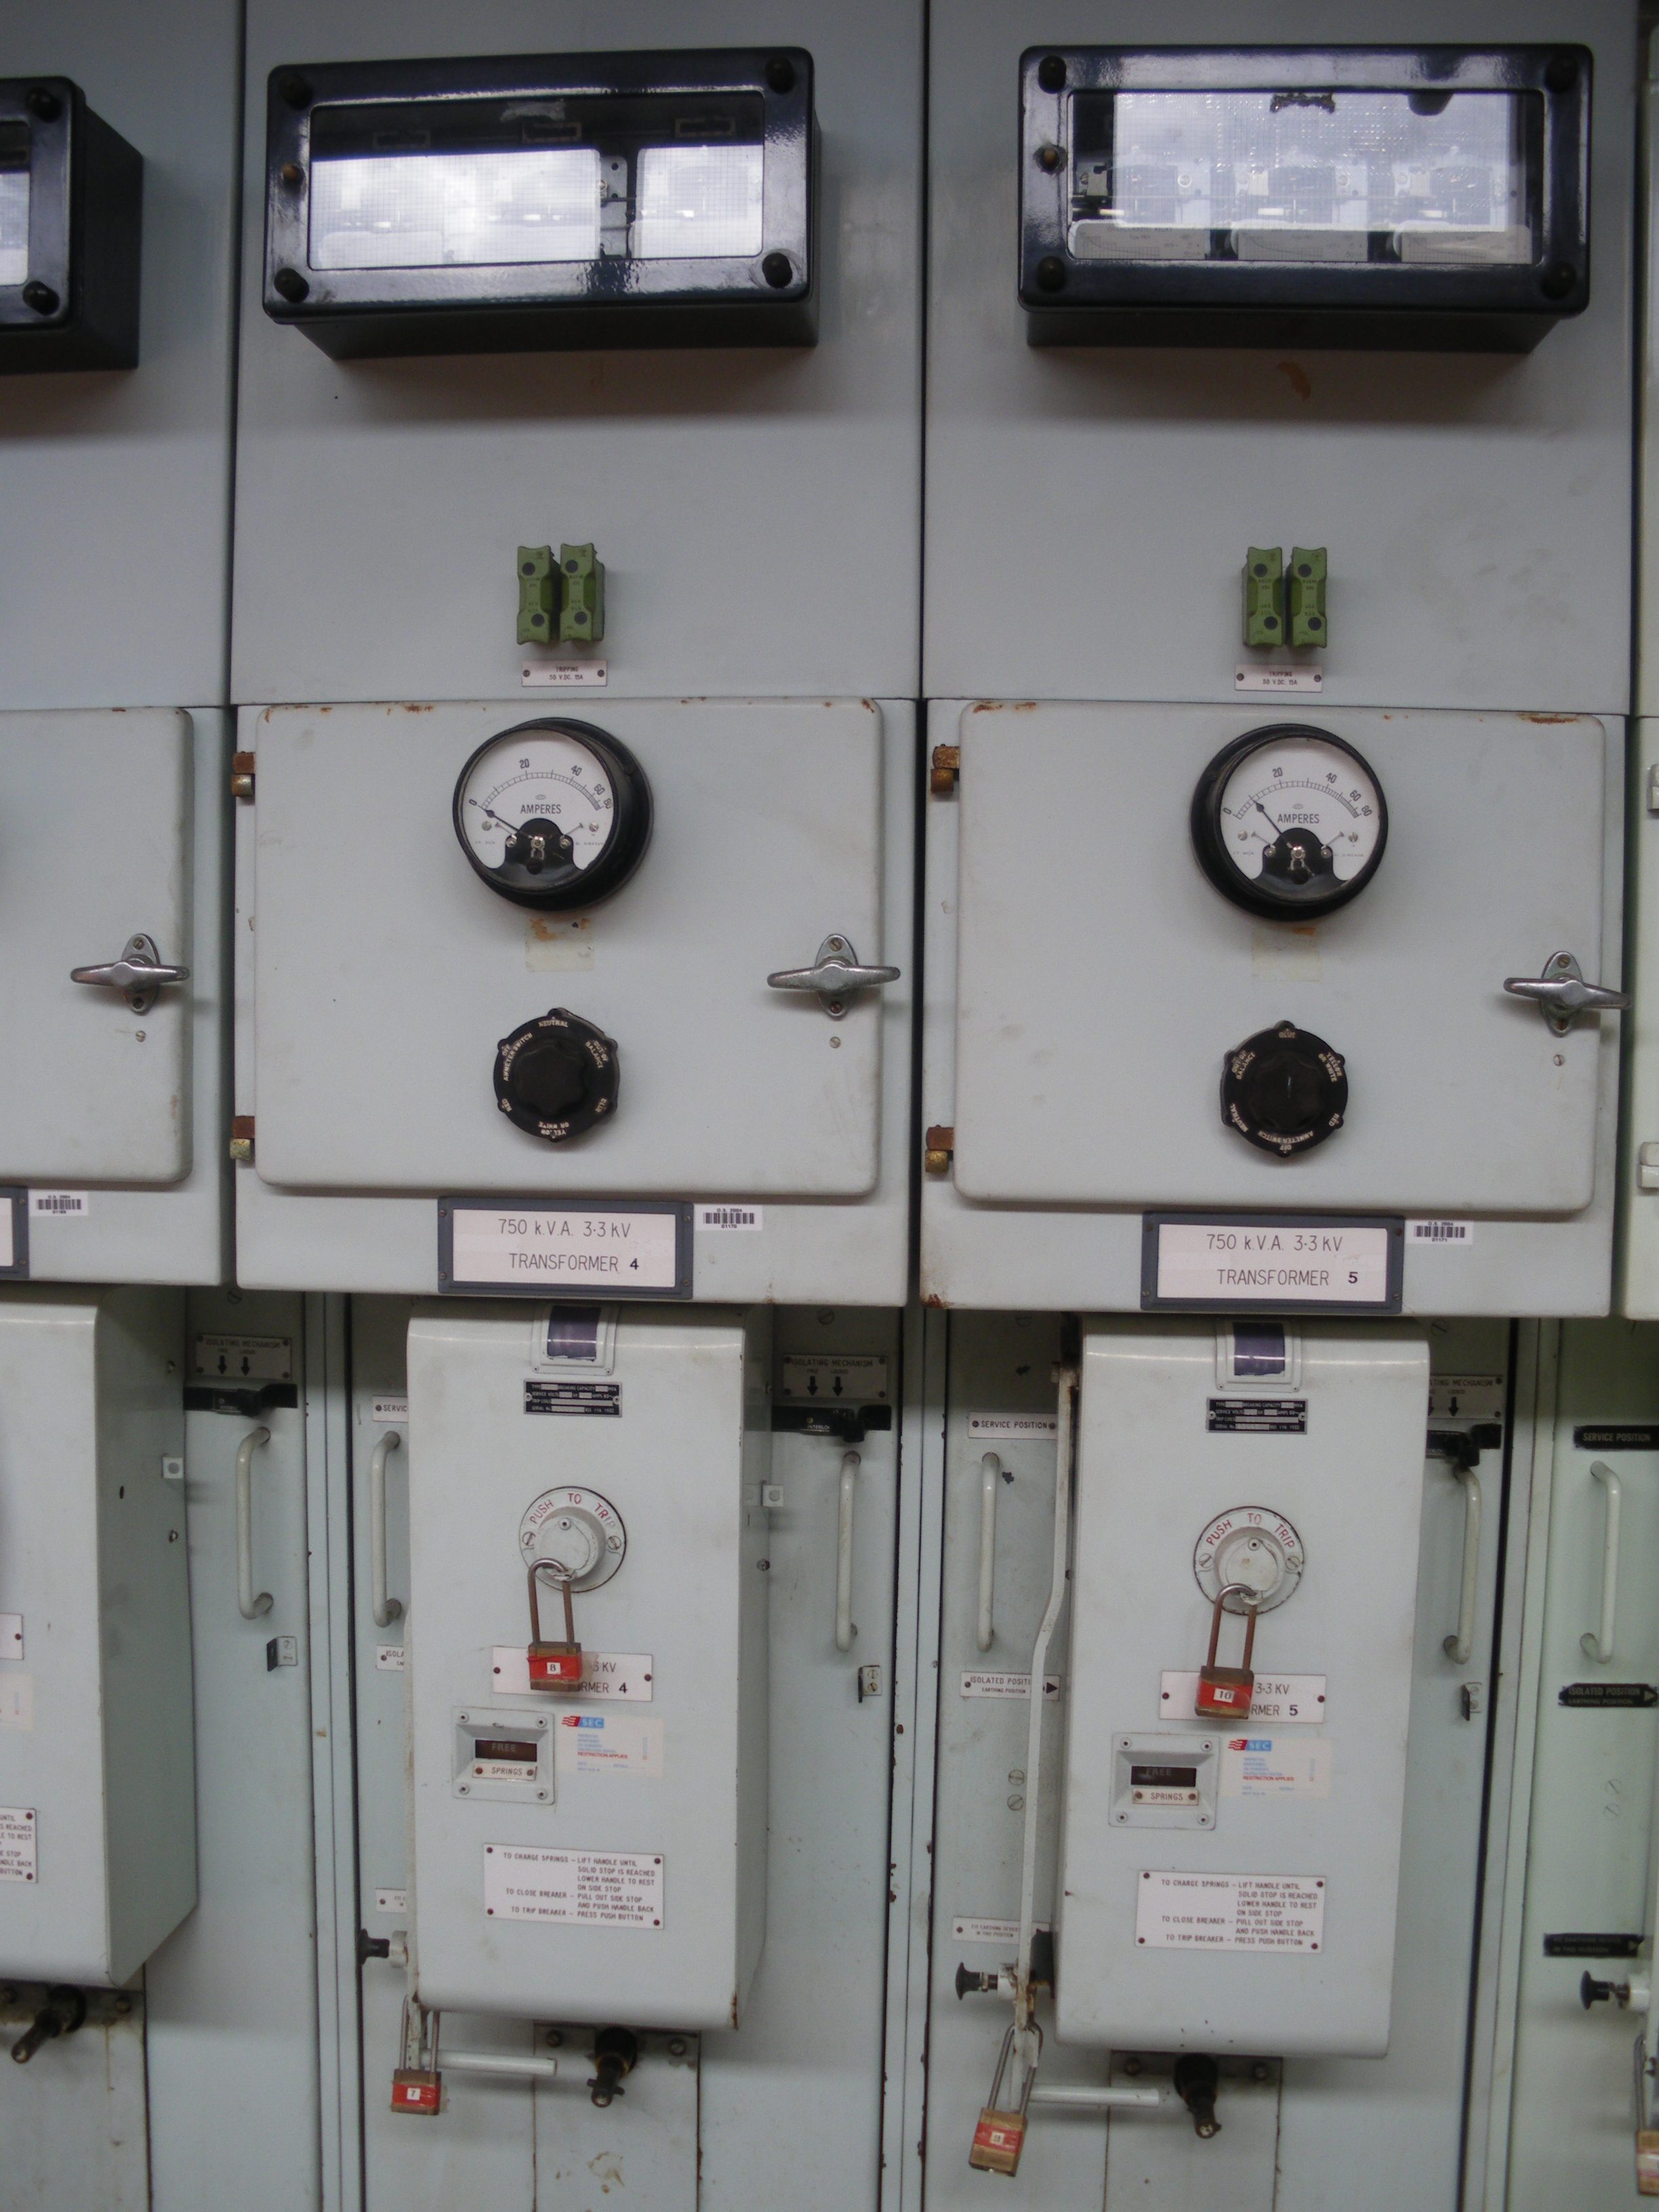 Substation - HV switchgear for transformers.